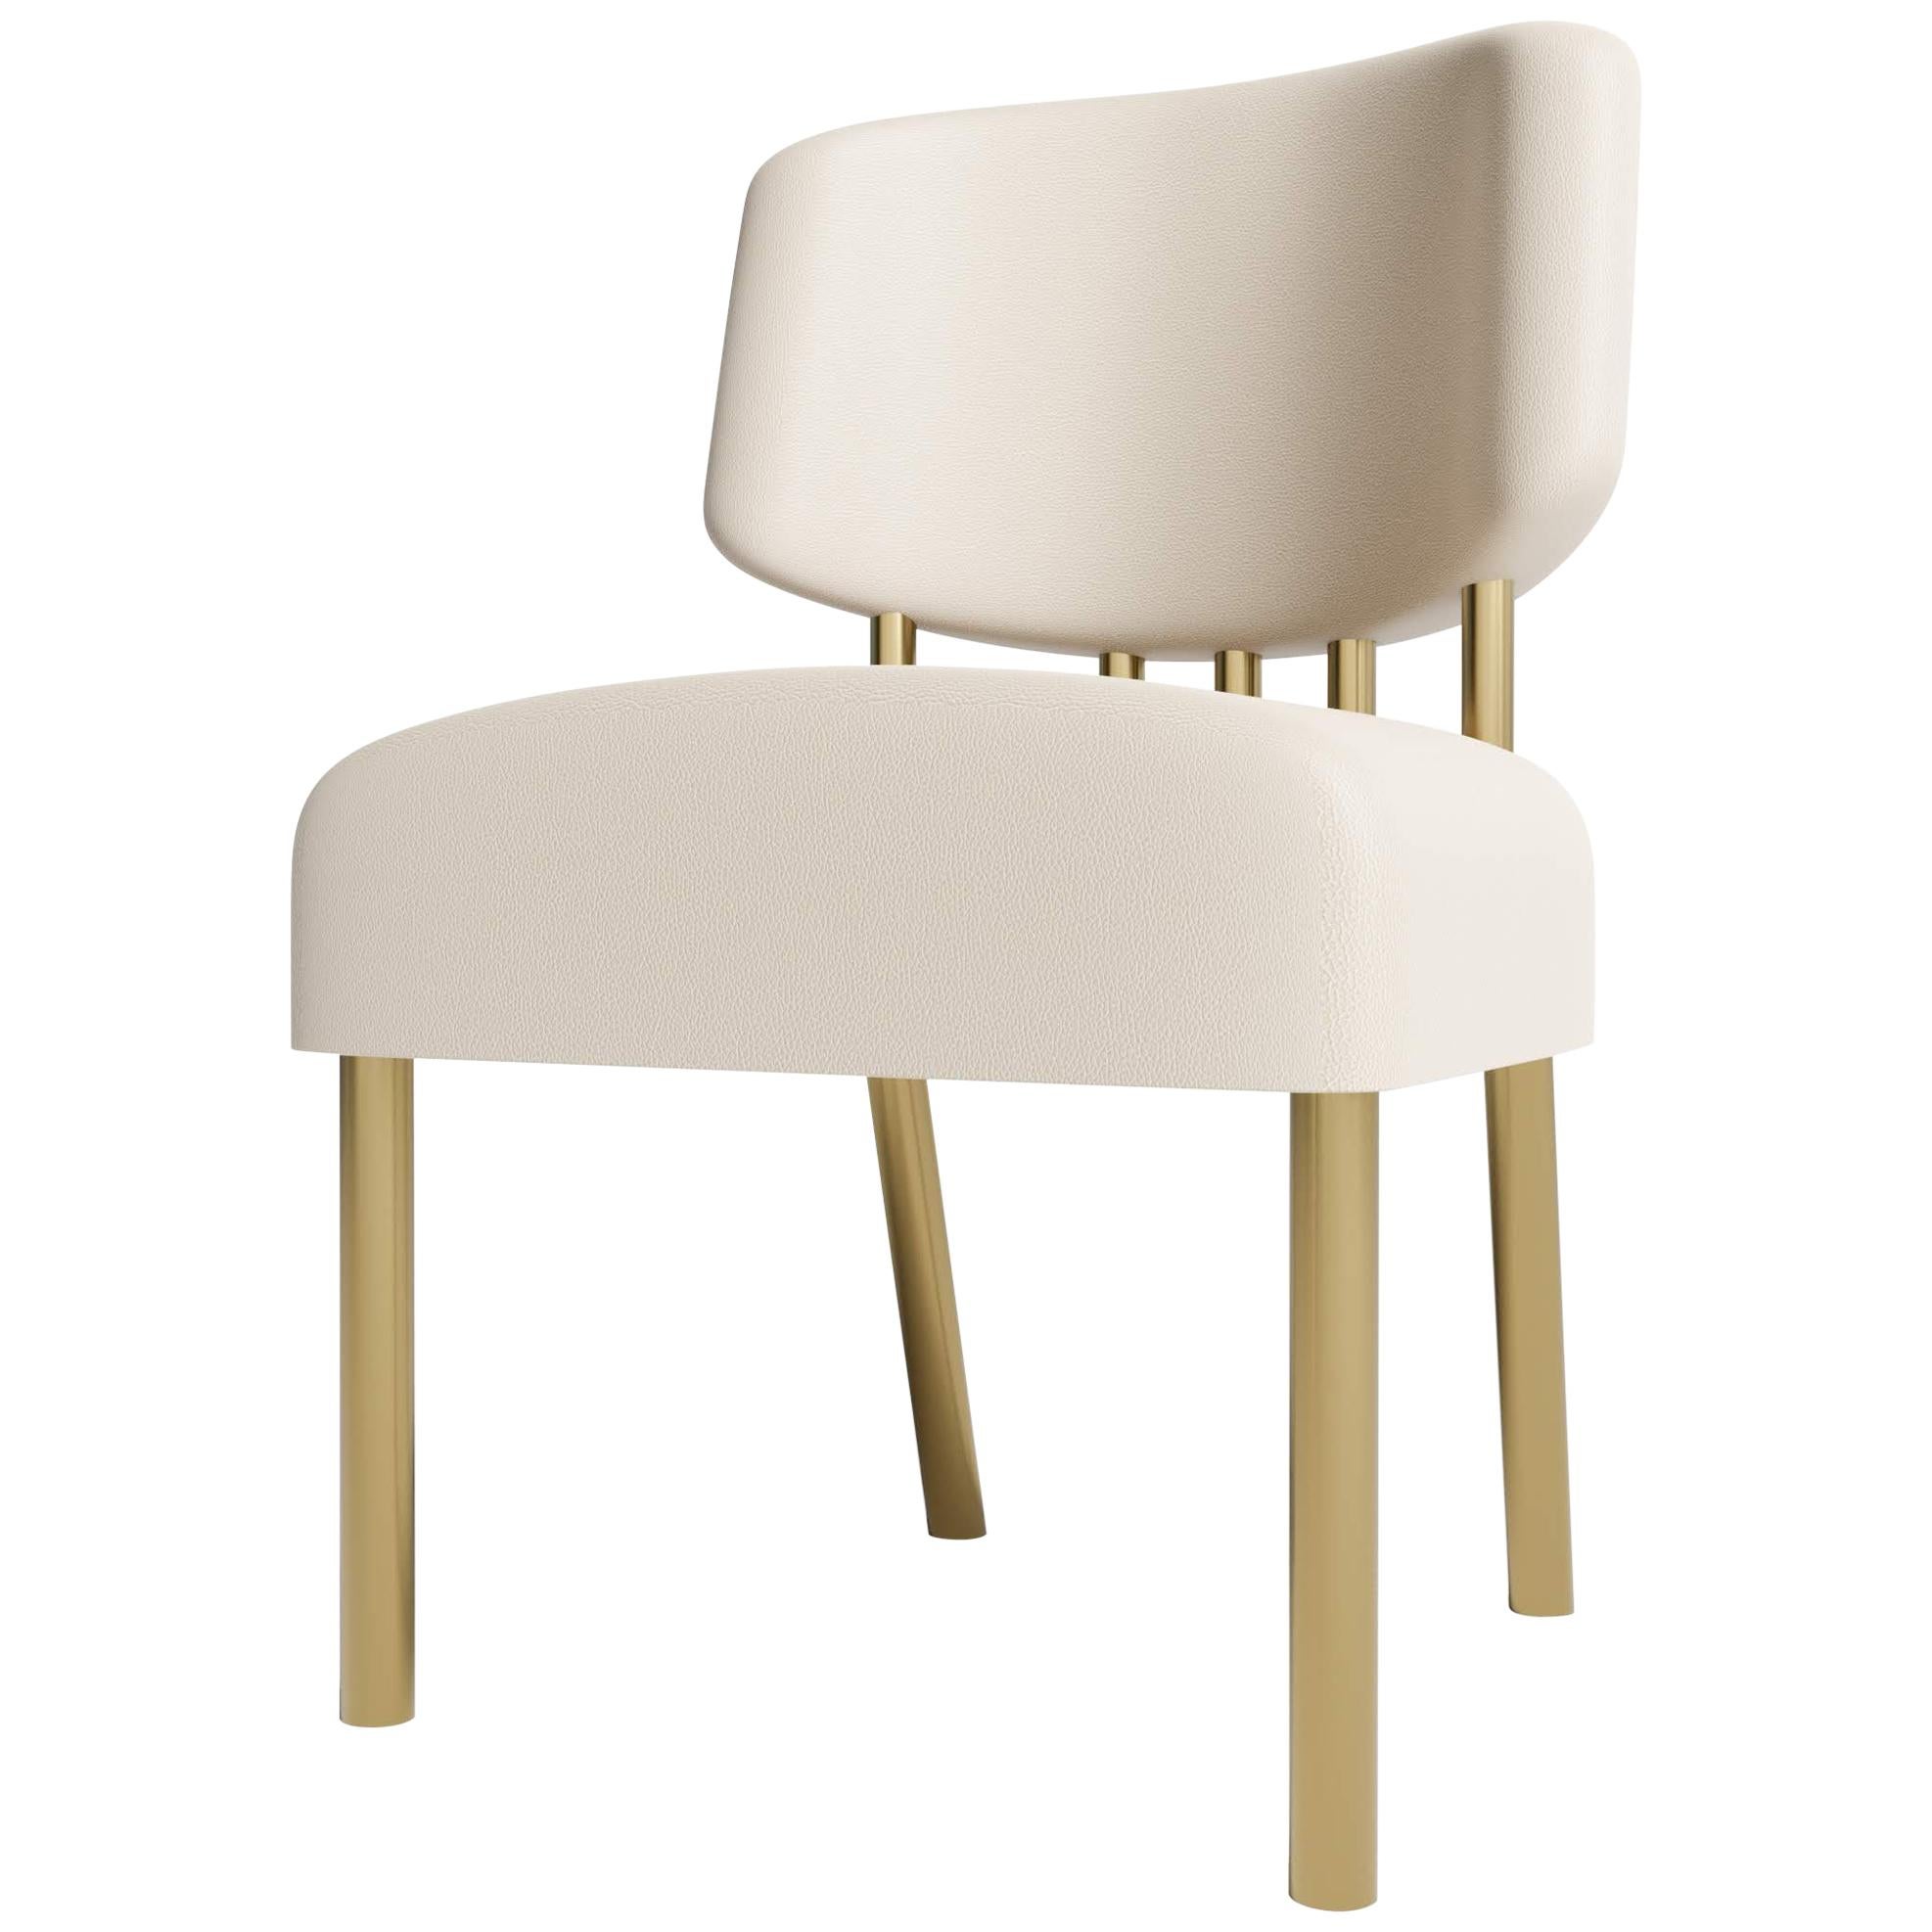 MORRO DINING CHAIR - Modern Dining Chair in Lealpell Leather with Bronze Legs